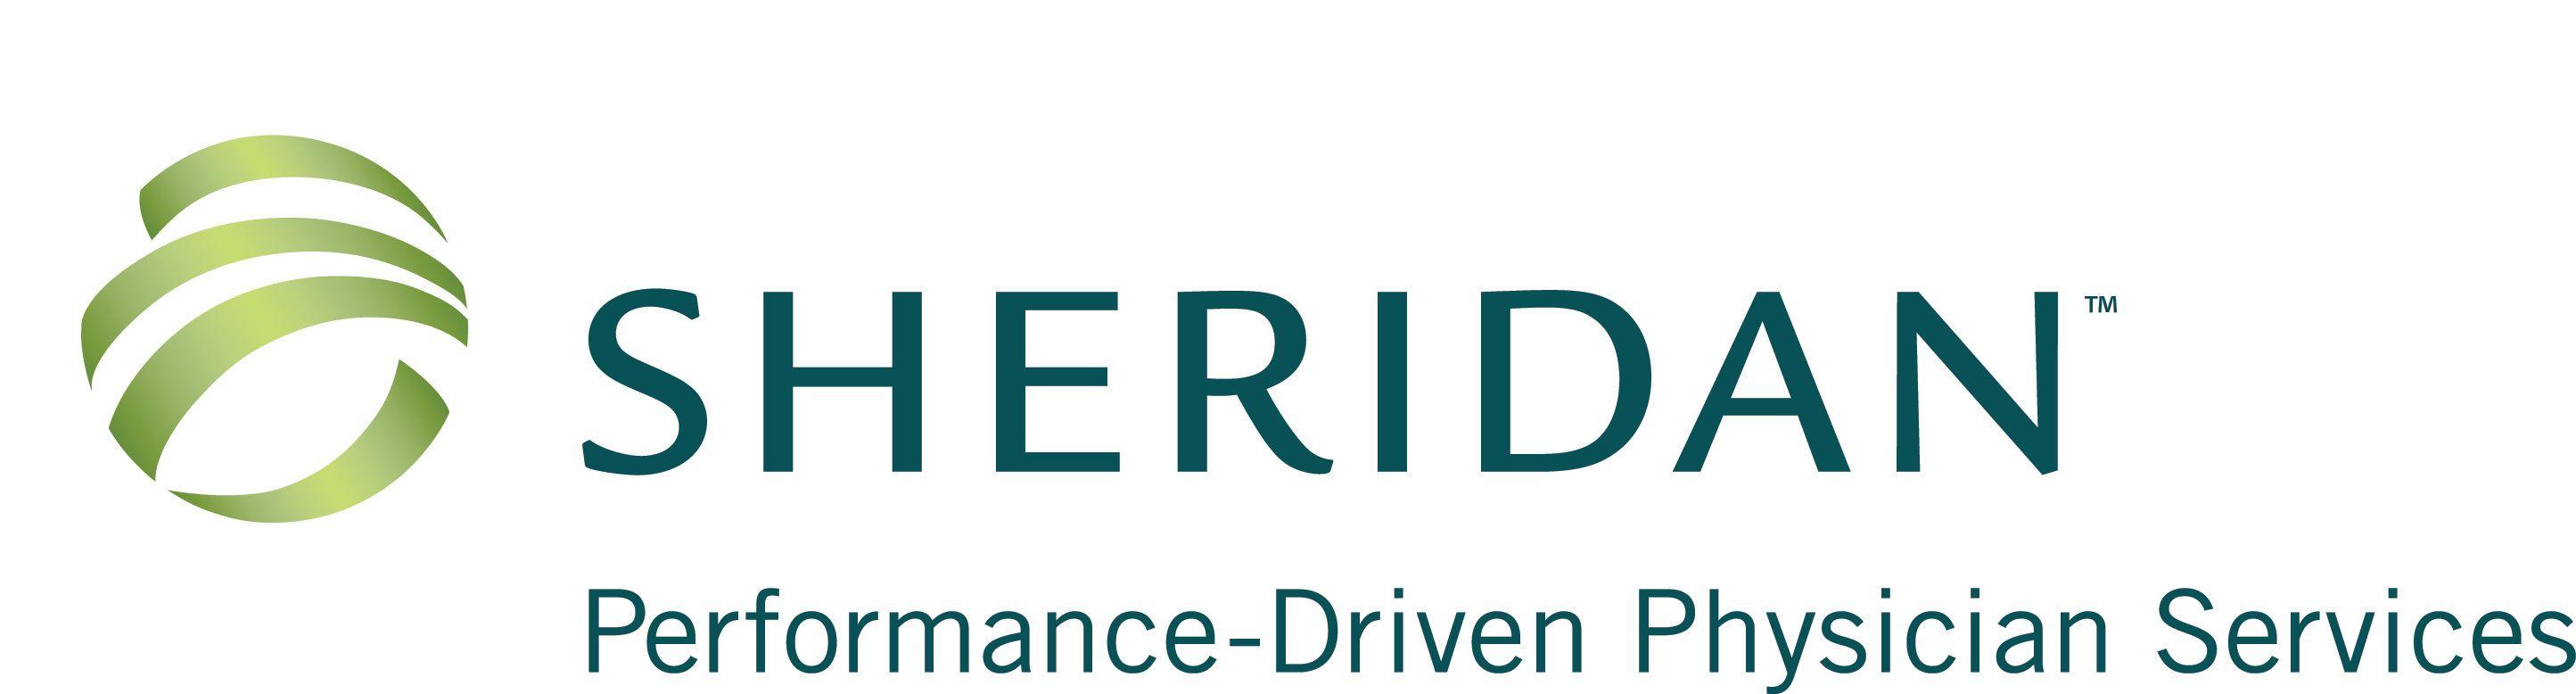 The Sheridan Logo - AMSURG Corp. to Acquire Sheridan Healthcare in Transformational ...